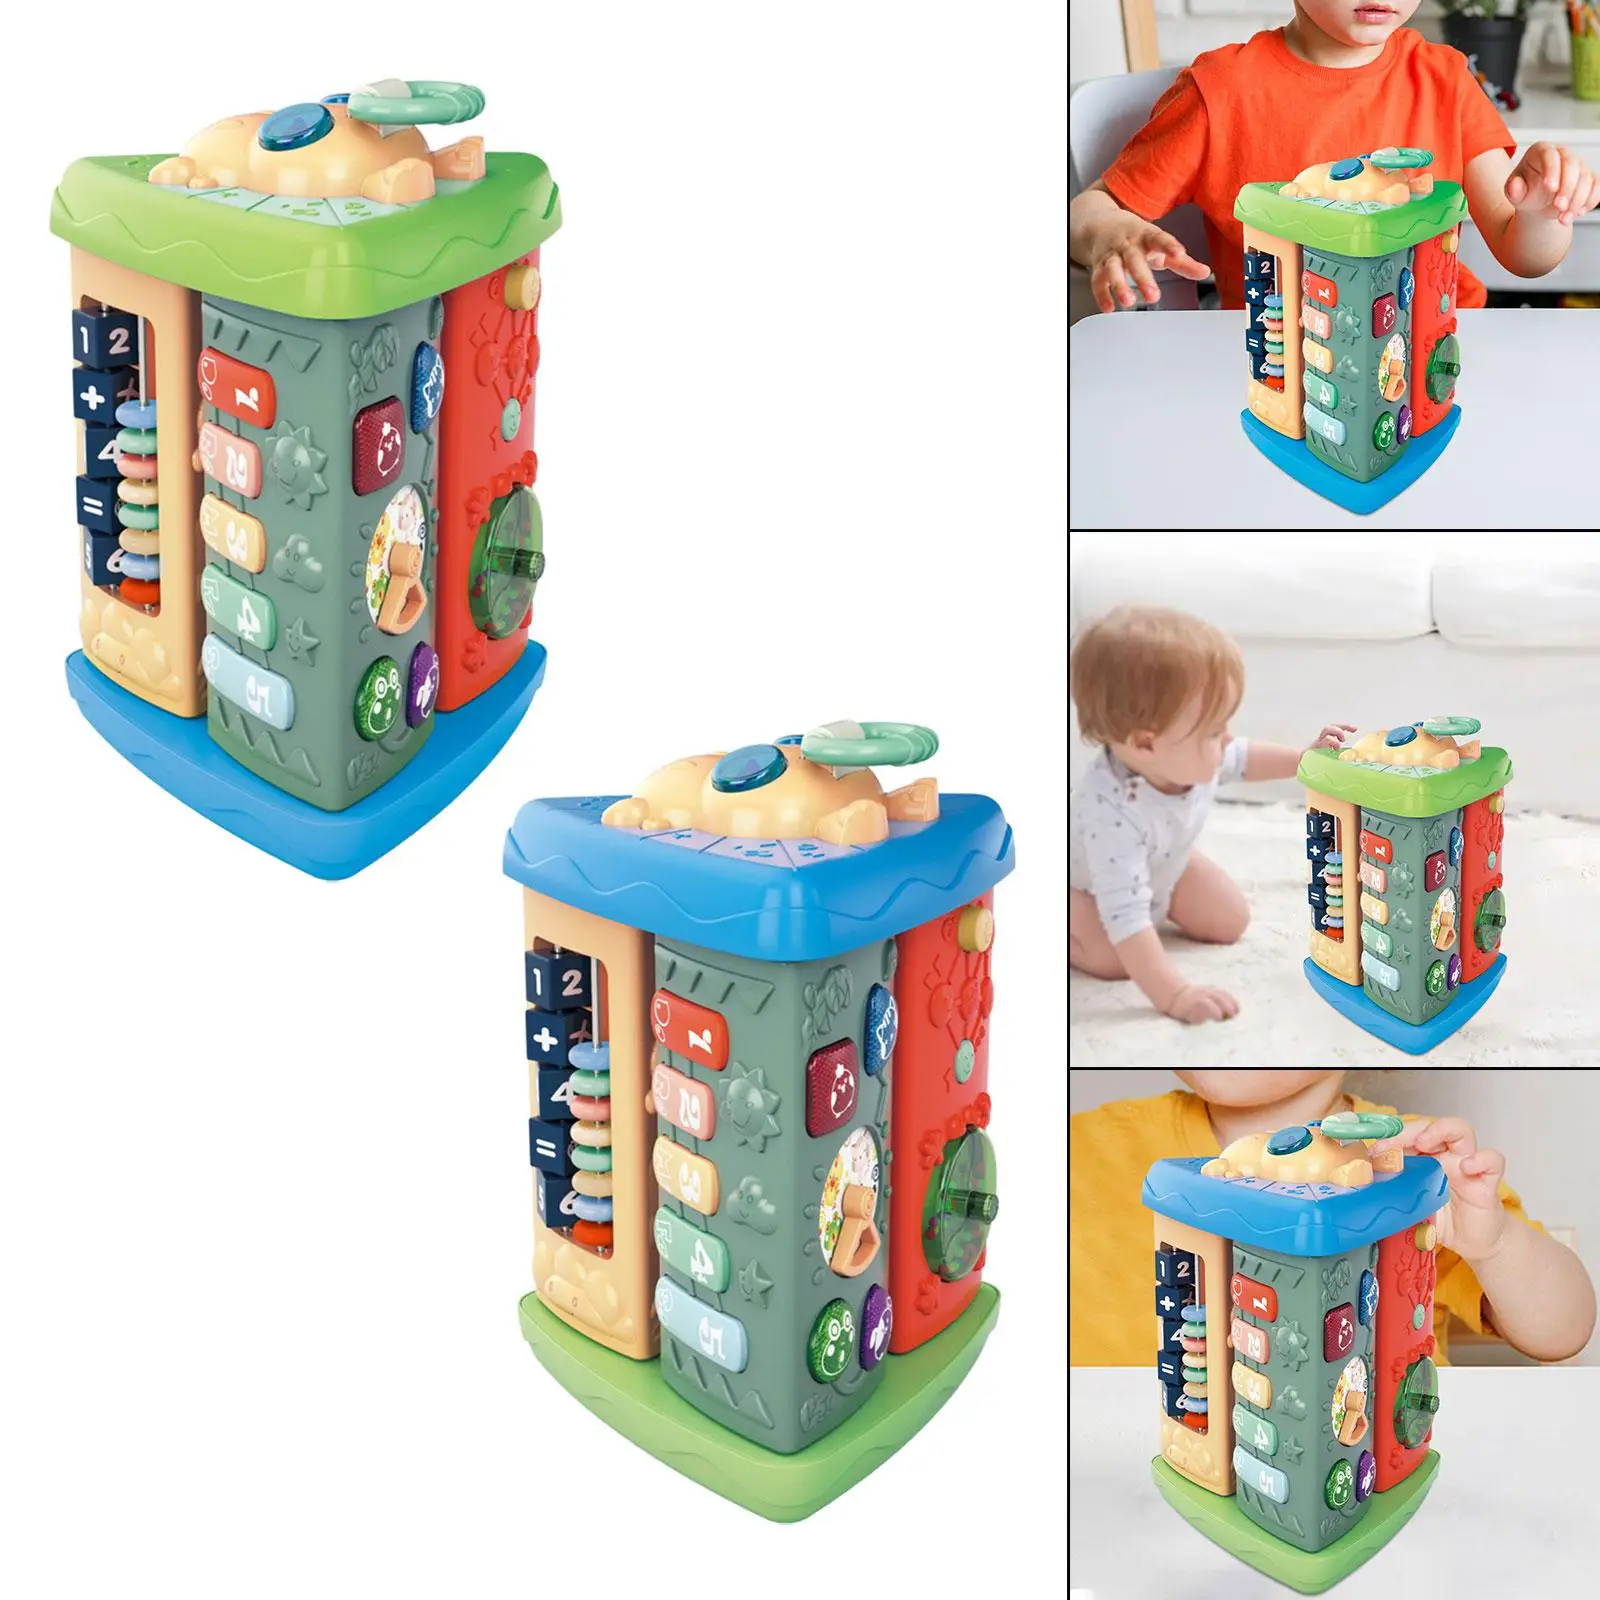 Creative Musical Activity Toys Busy Board for Kids 1 2 3 Birthday Gifts